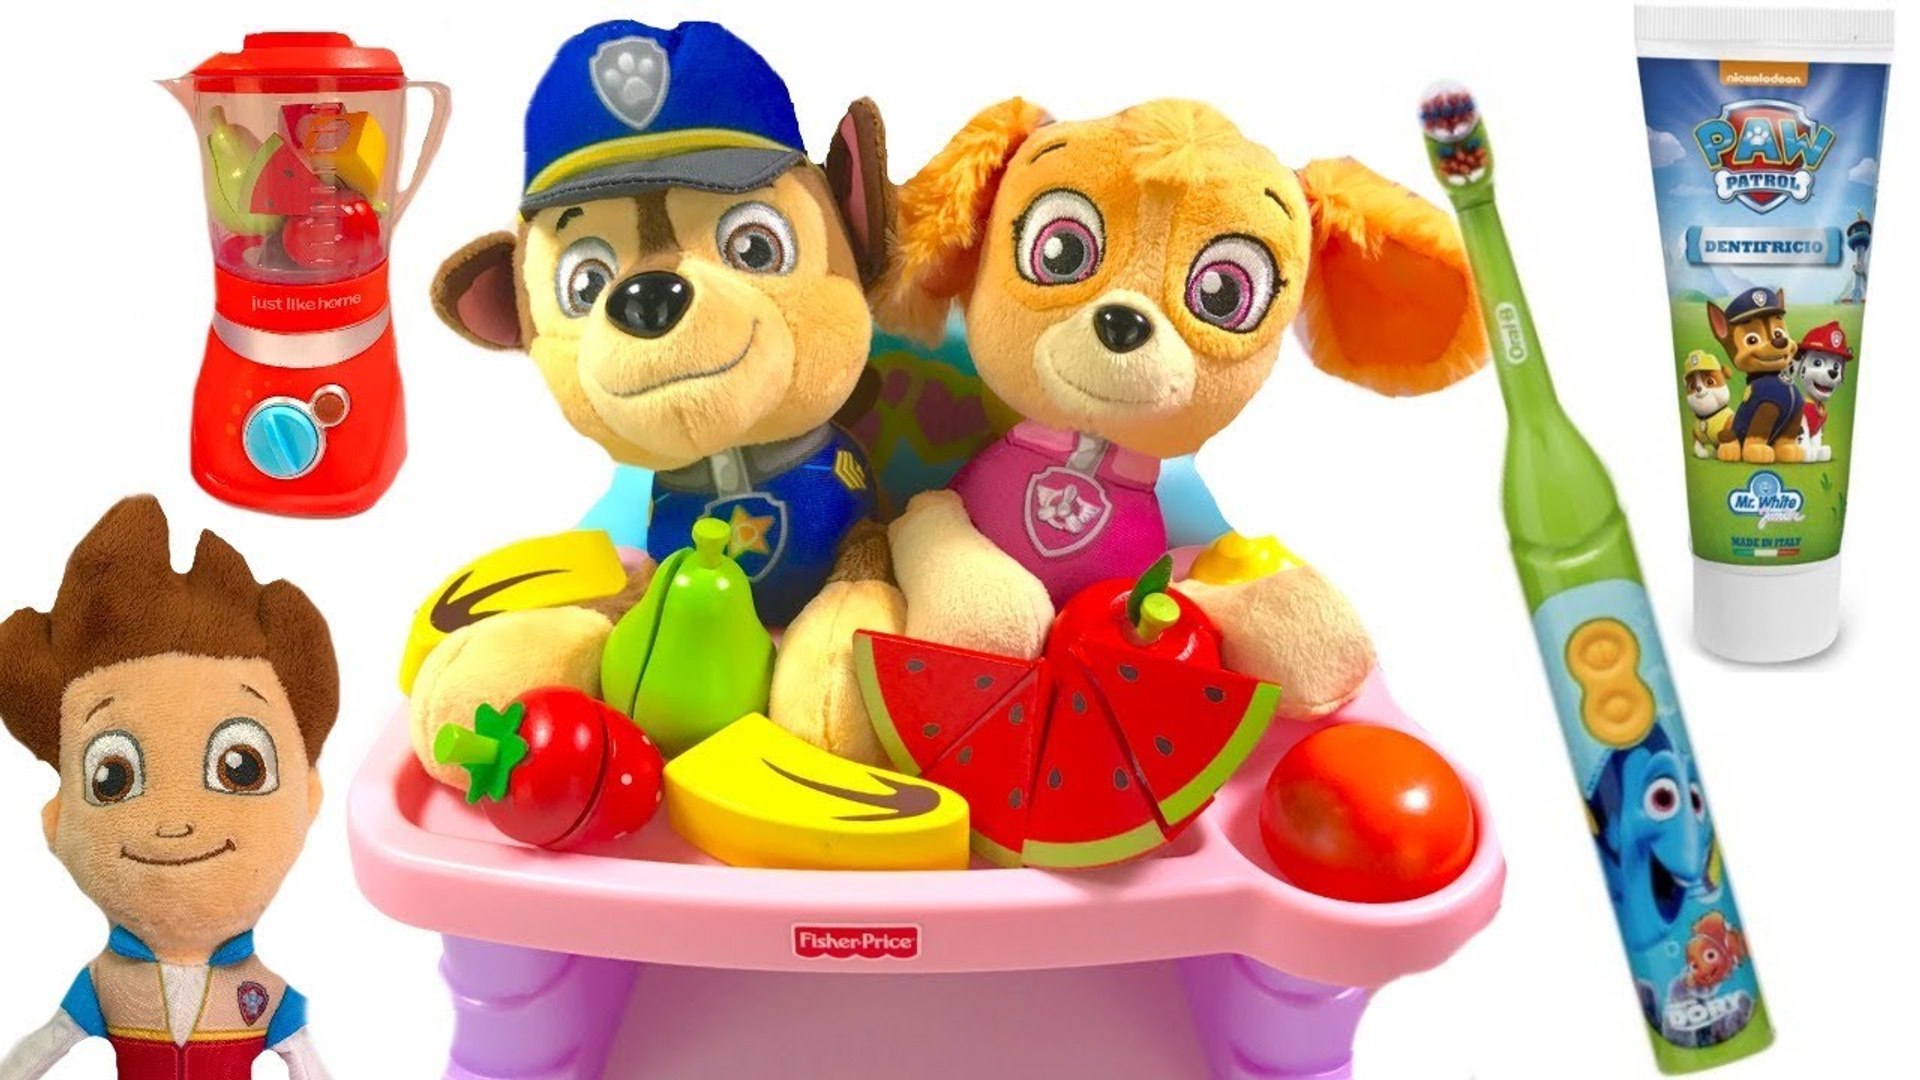 salut efterklang udtryk Paw Patrol Skye and Chase Eat Fruits and Vegetables and Brush Their Teeth -  video Dailymotion